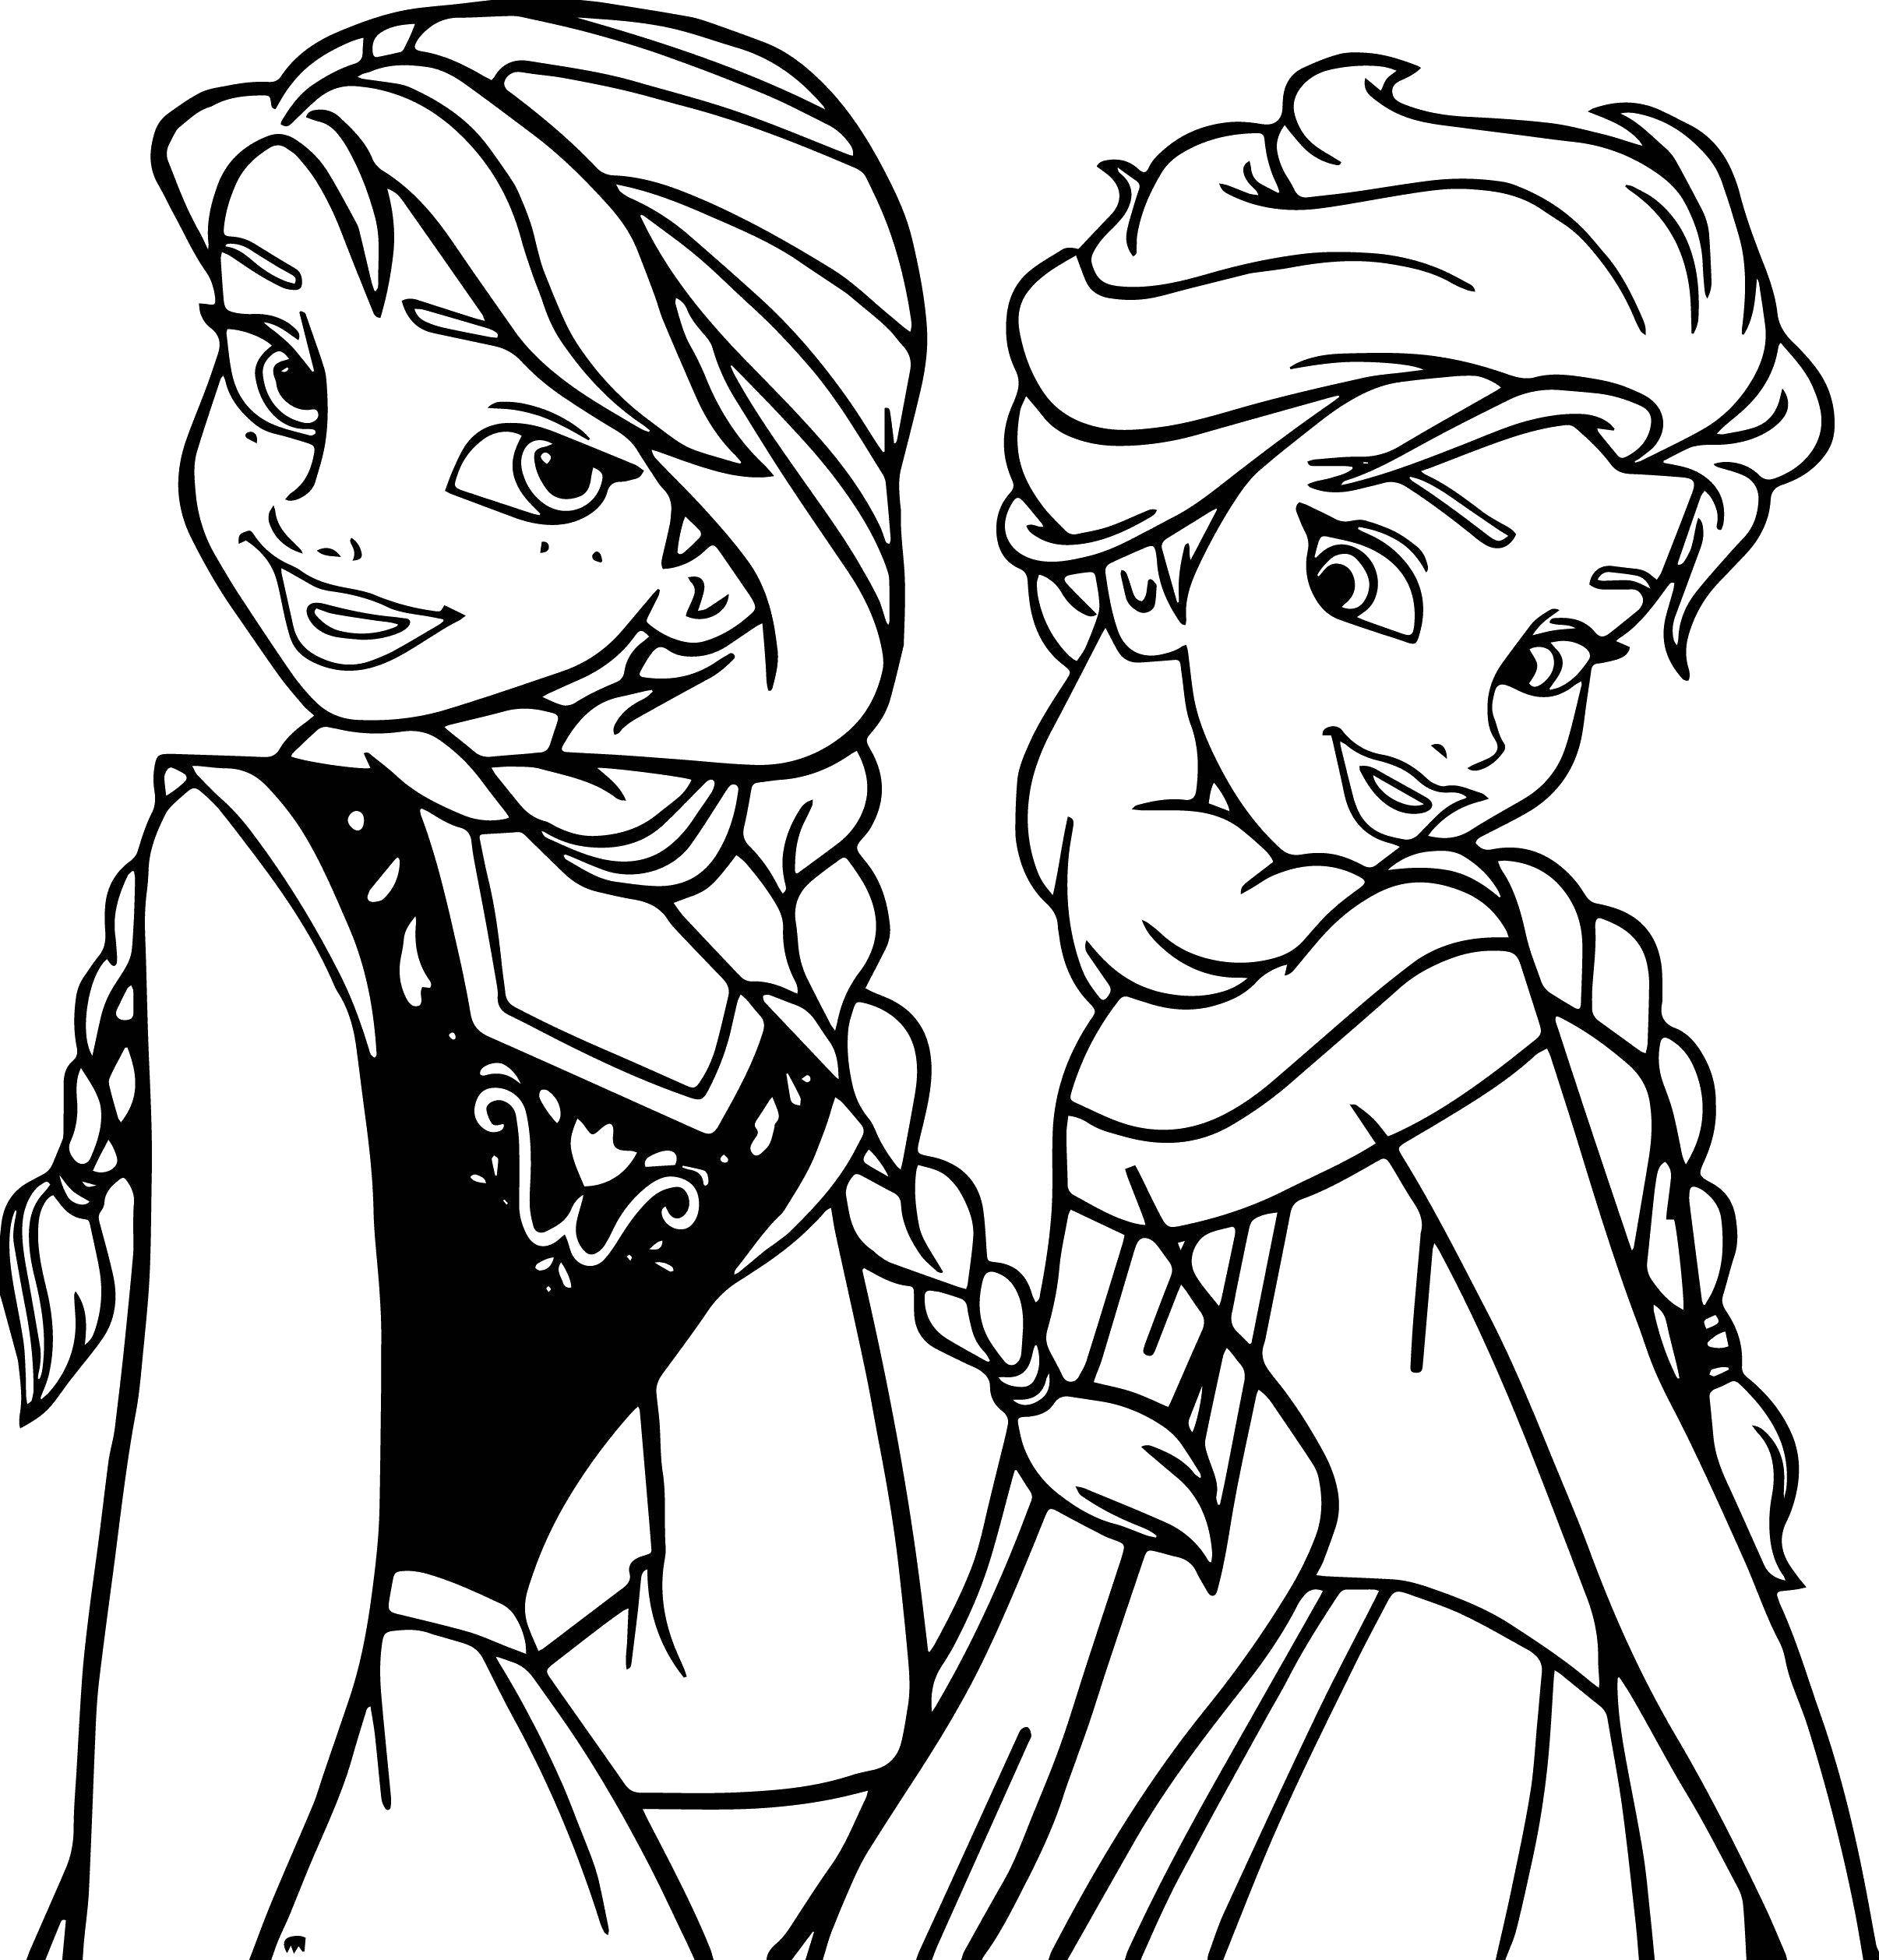 Coloring Cartoon characters cold heart . Category Disney coloring pages. Tags:  Disney, Elsa, frozen, Princess.